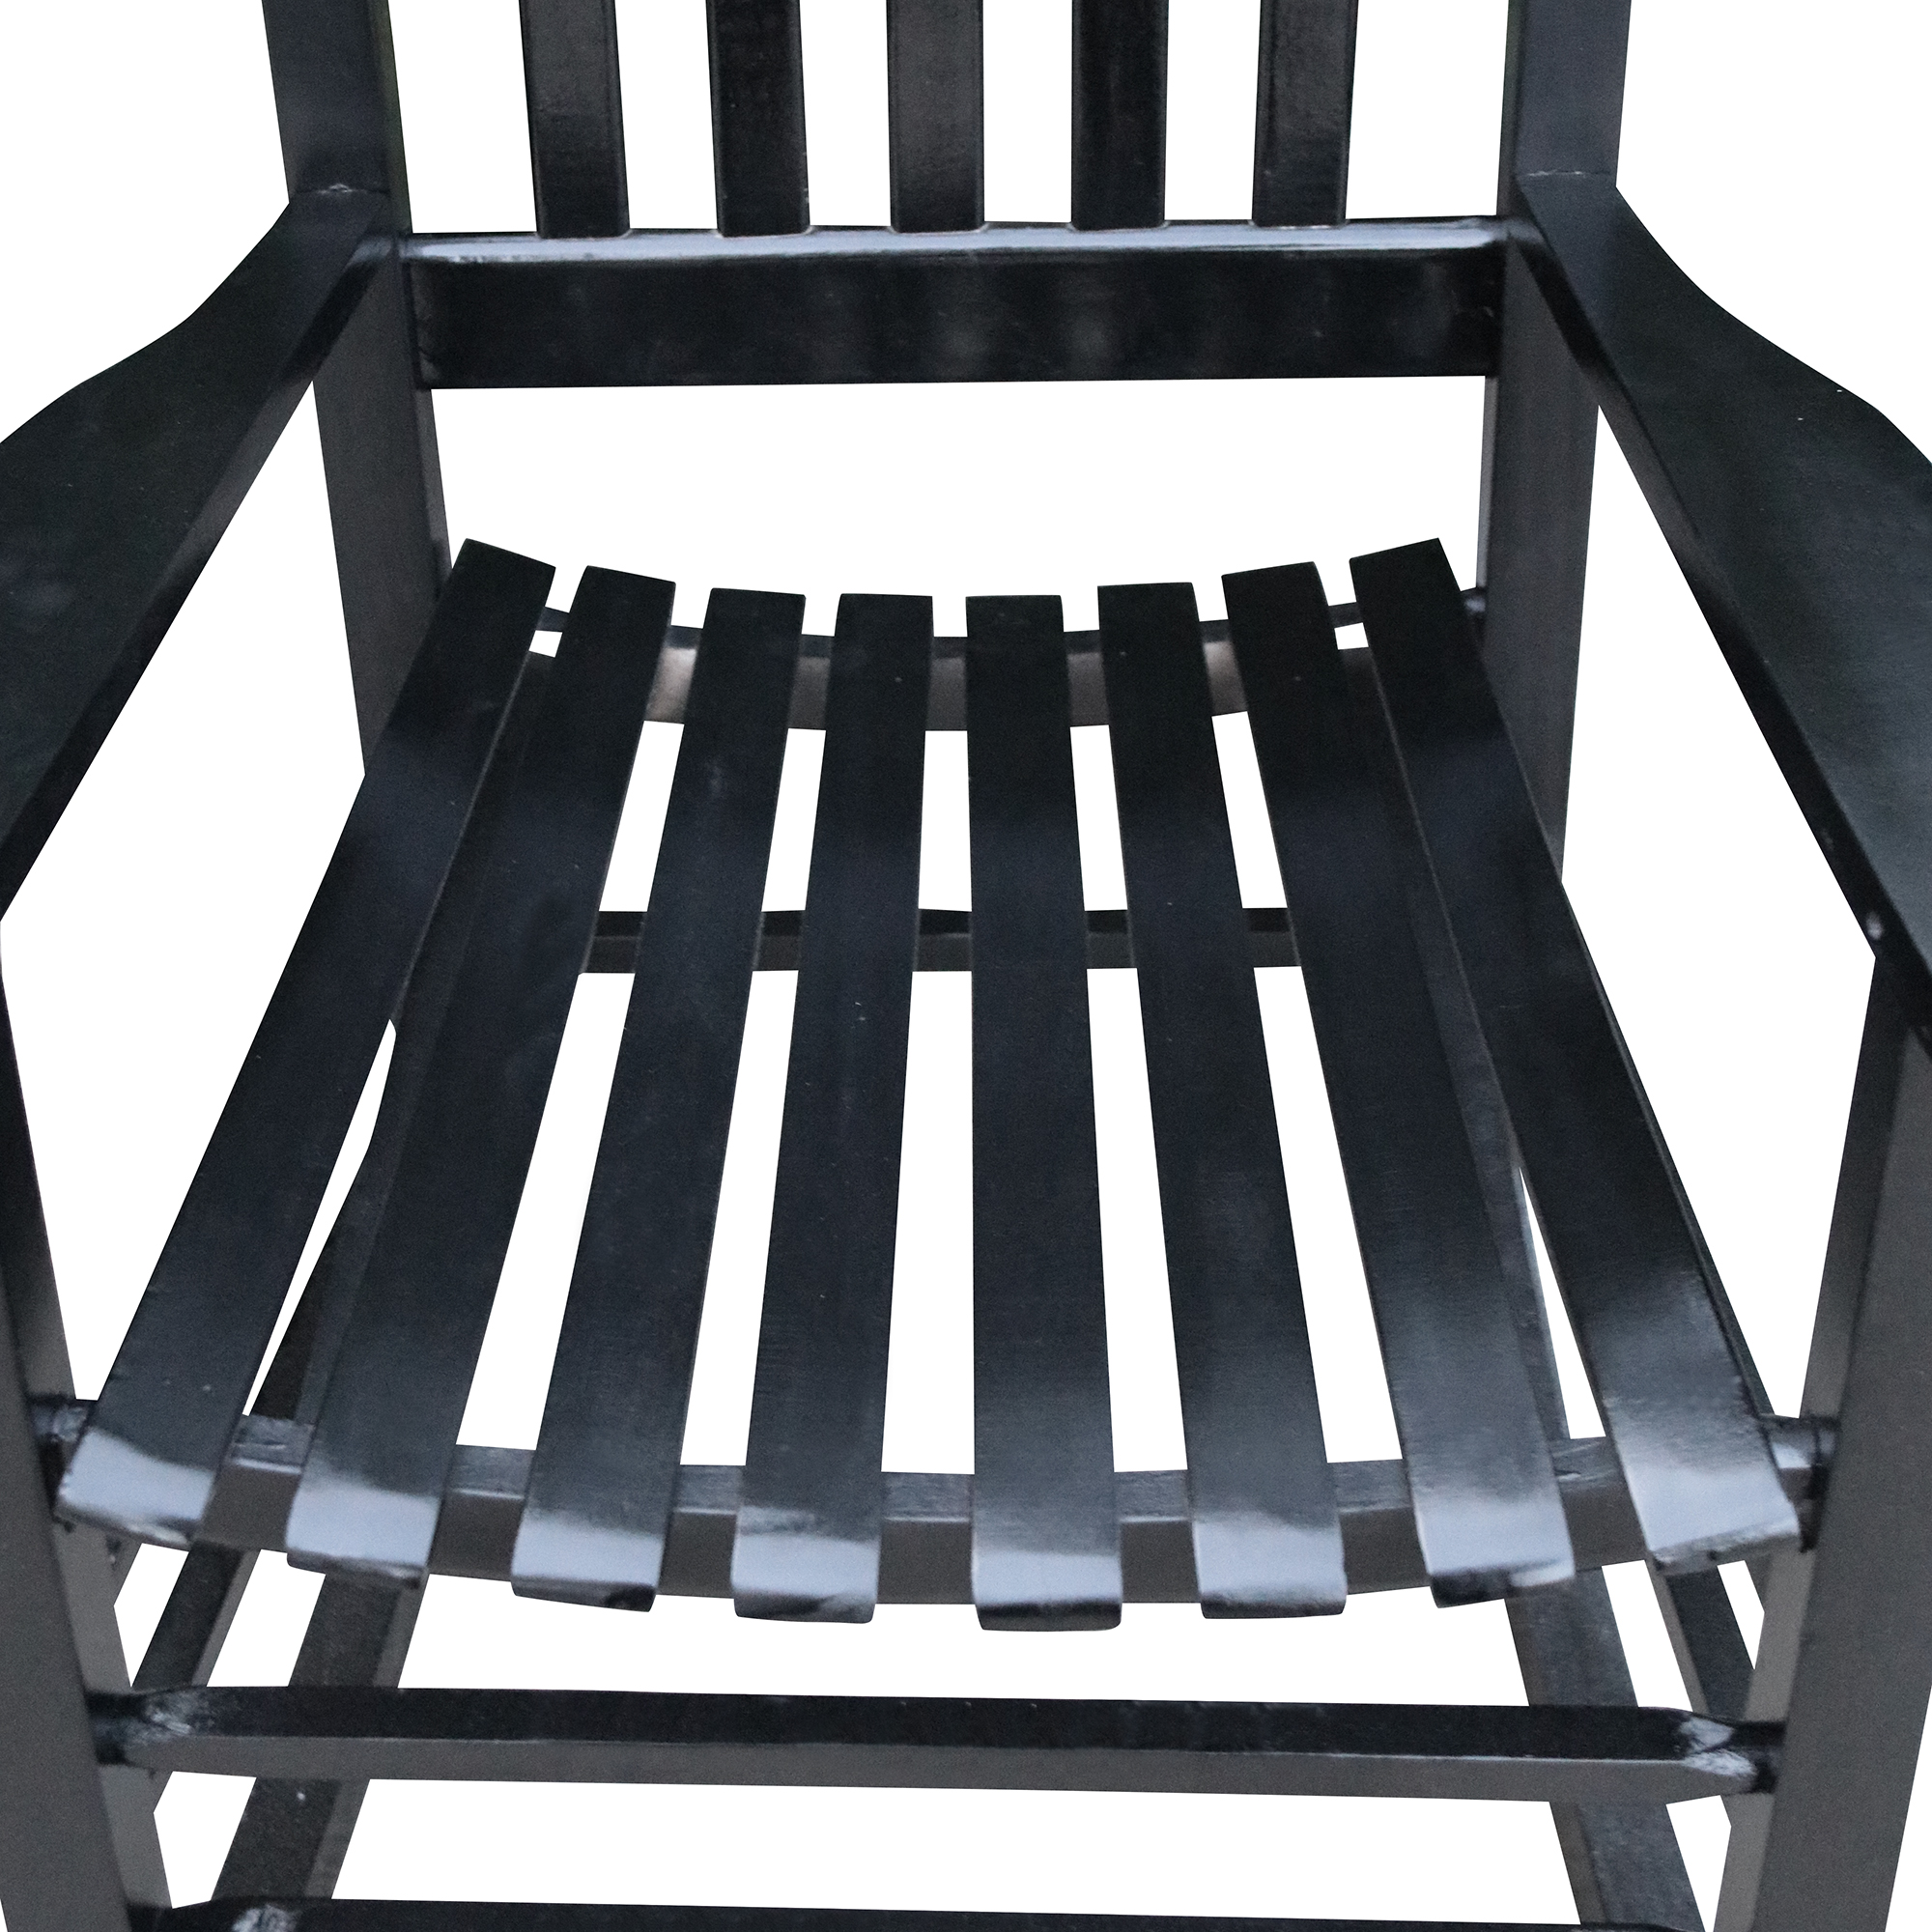 Nine Bull Wooden Porch Rocker Chair, Rocking Lounge Chair for Patio Balcony Yard, Black - image 5 of 5